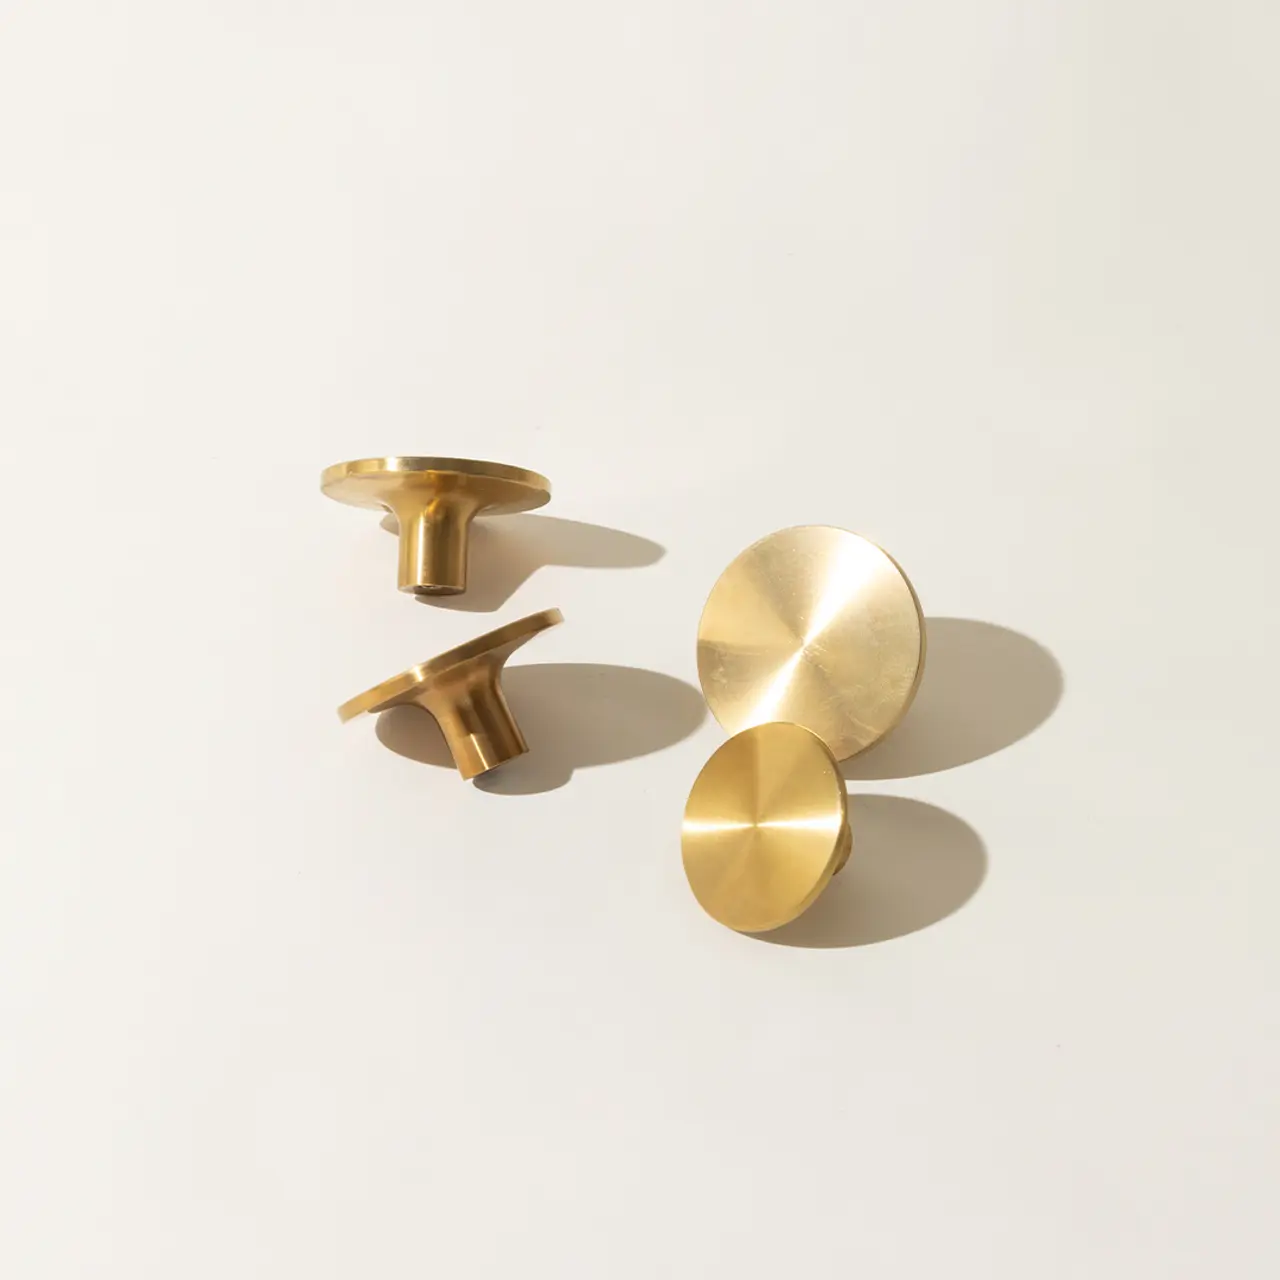 Three modern, circular brass knobs of varying sizes displayed on a light surface, casting soft shadows.